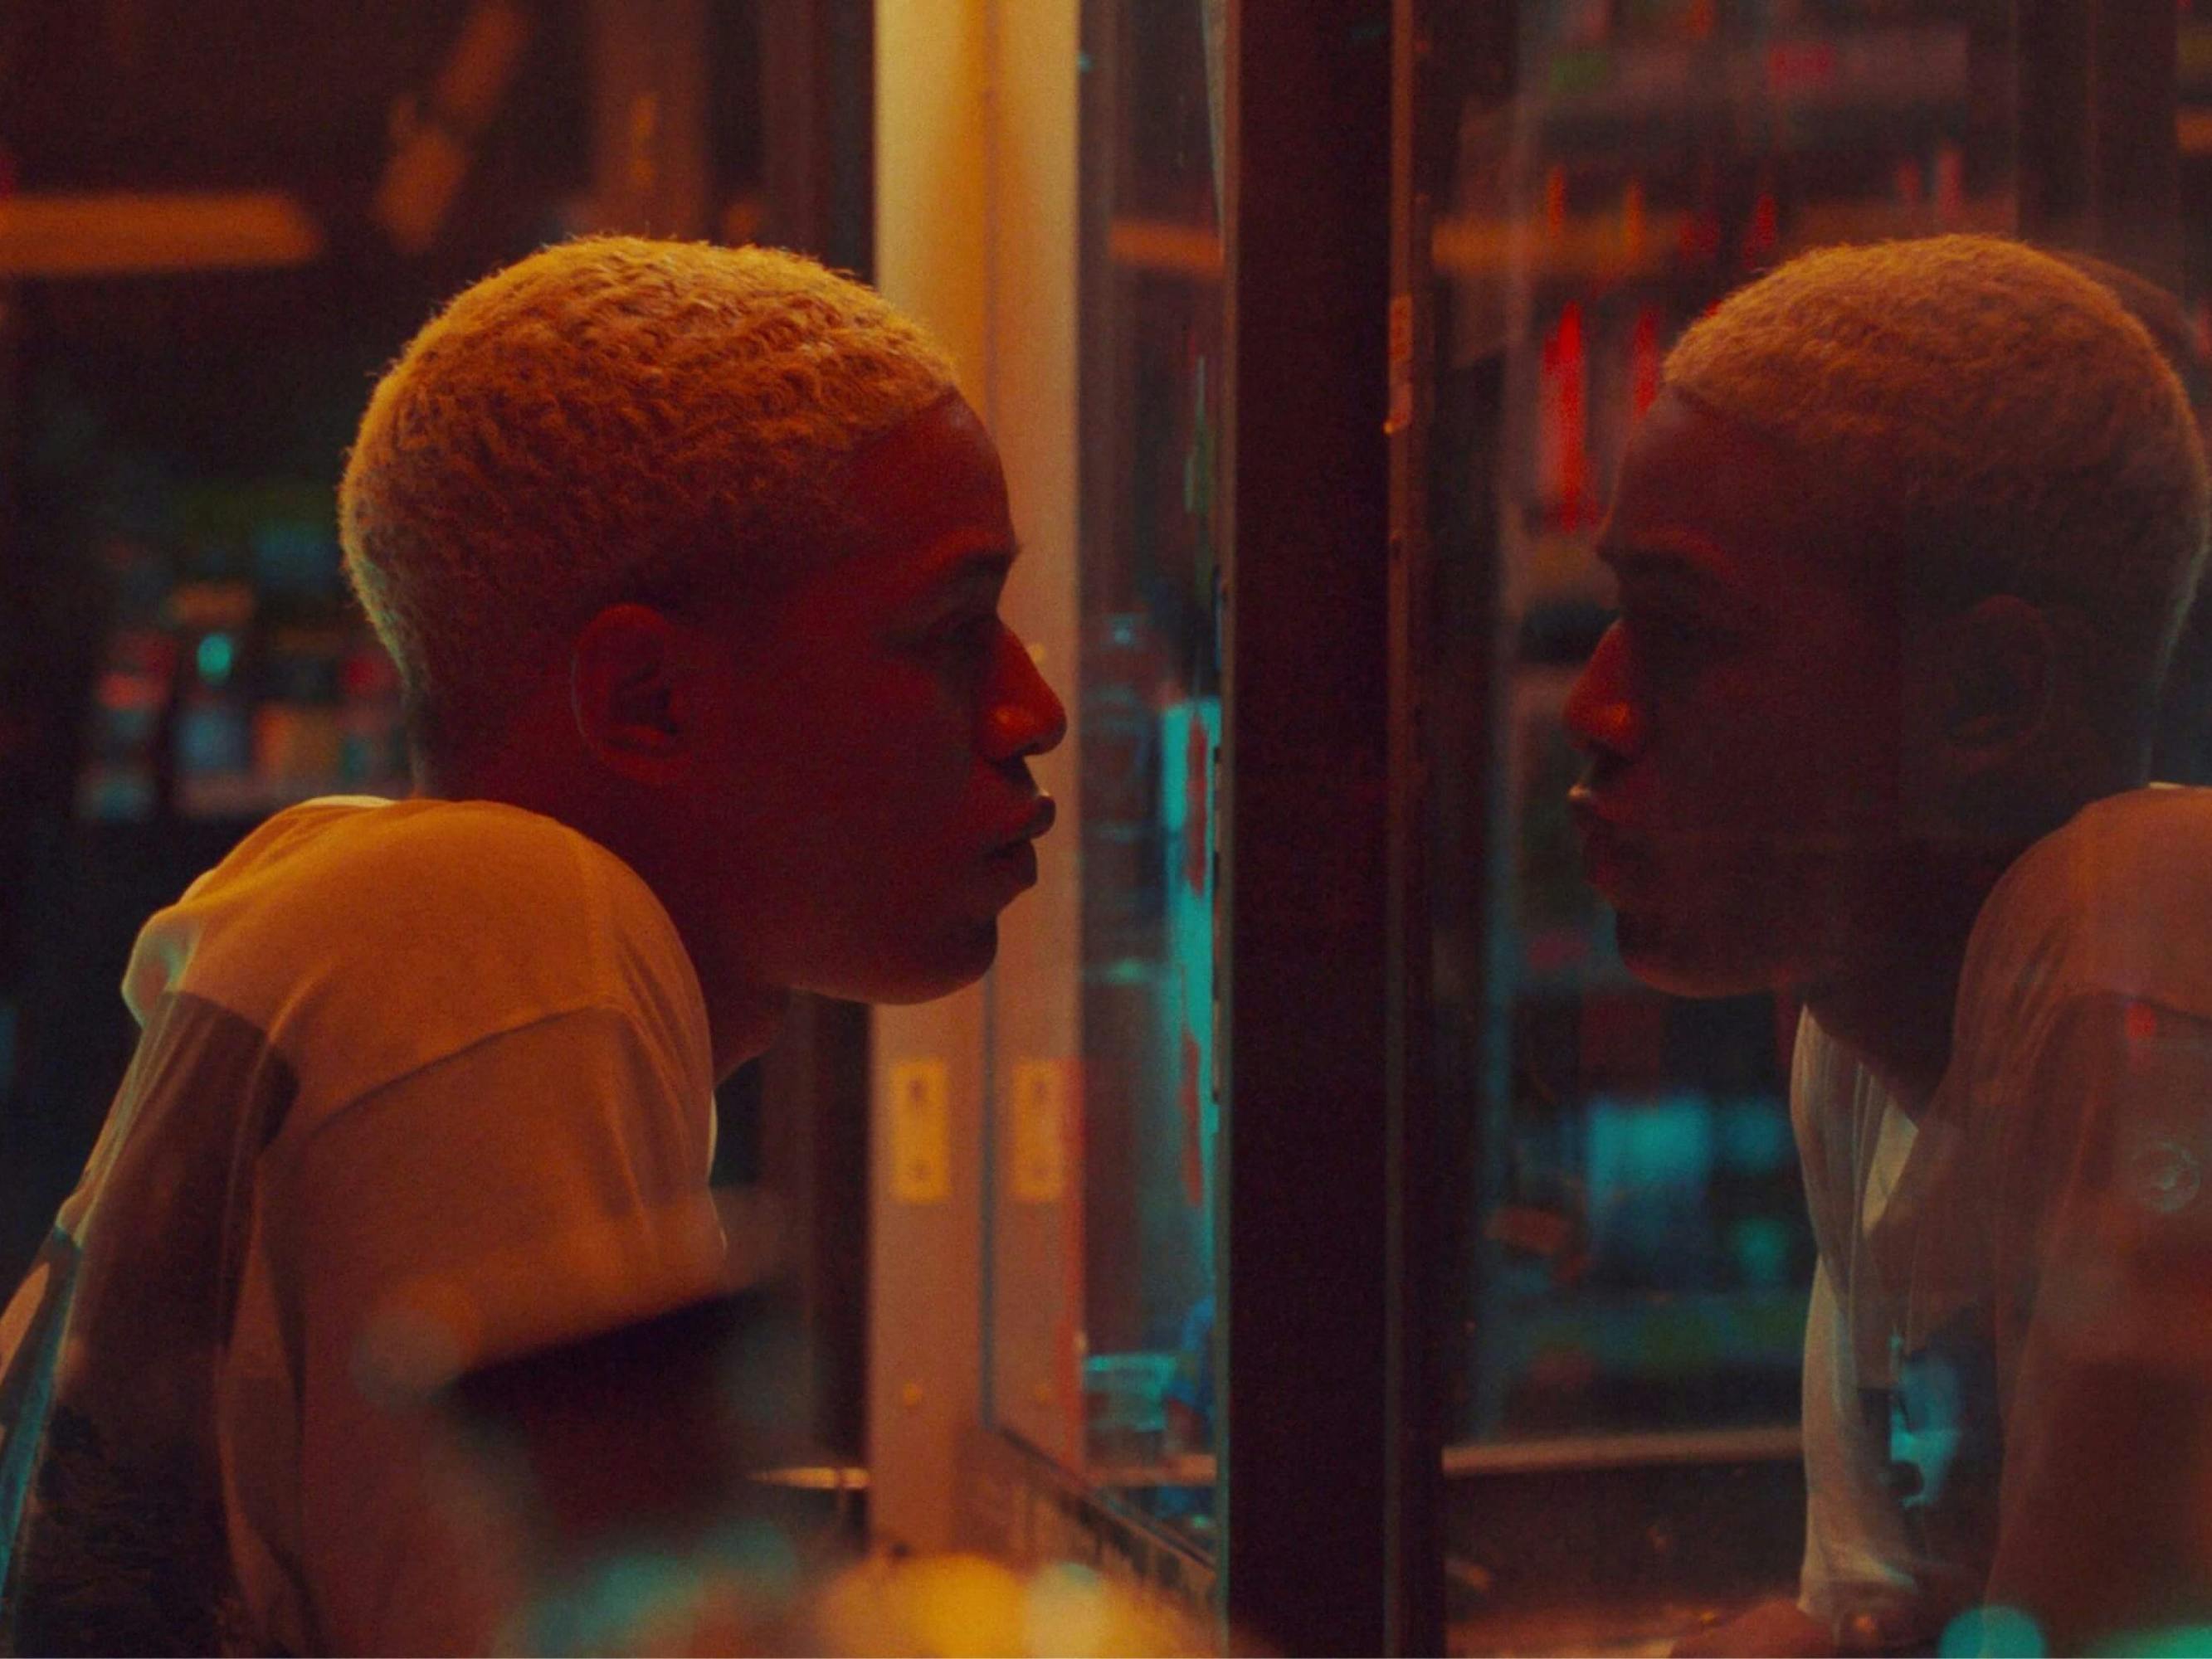 Harrison as Tyler in Waves. His hair is bleached and he wears a white t-shirt as he looks at his own reflection in the mirror. This image is made even more psychedelic by the bright flashes of neon color. 